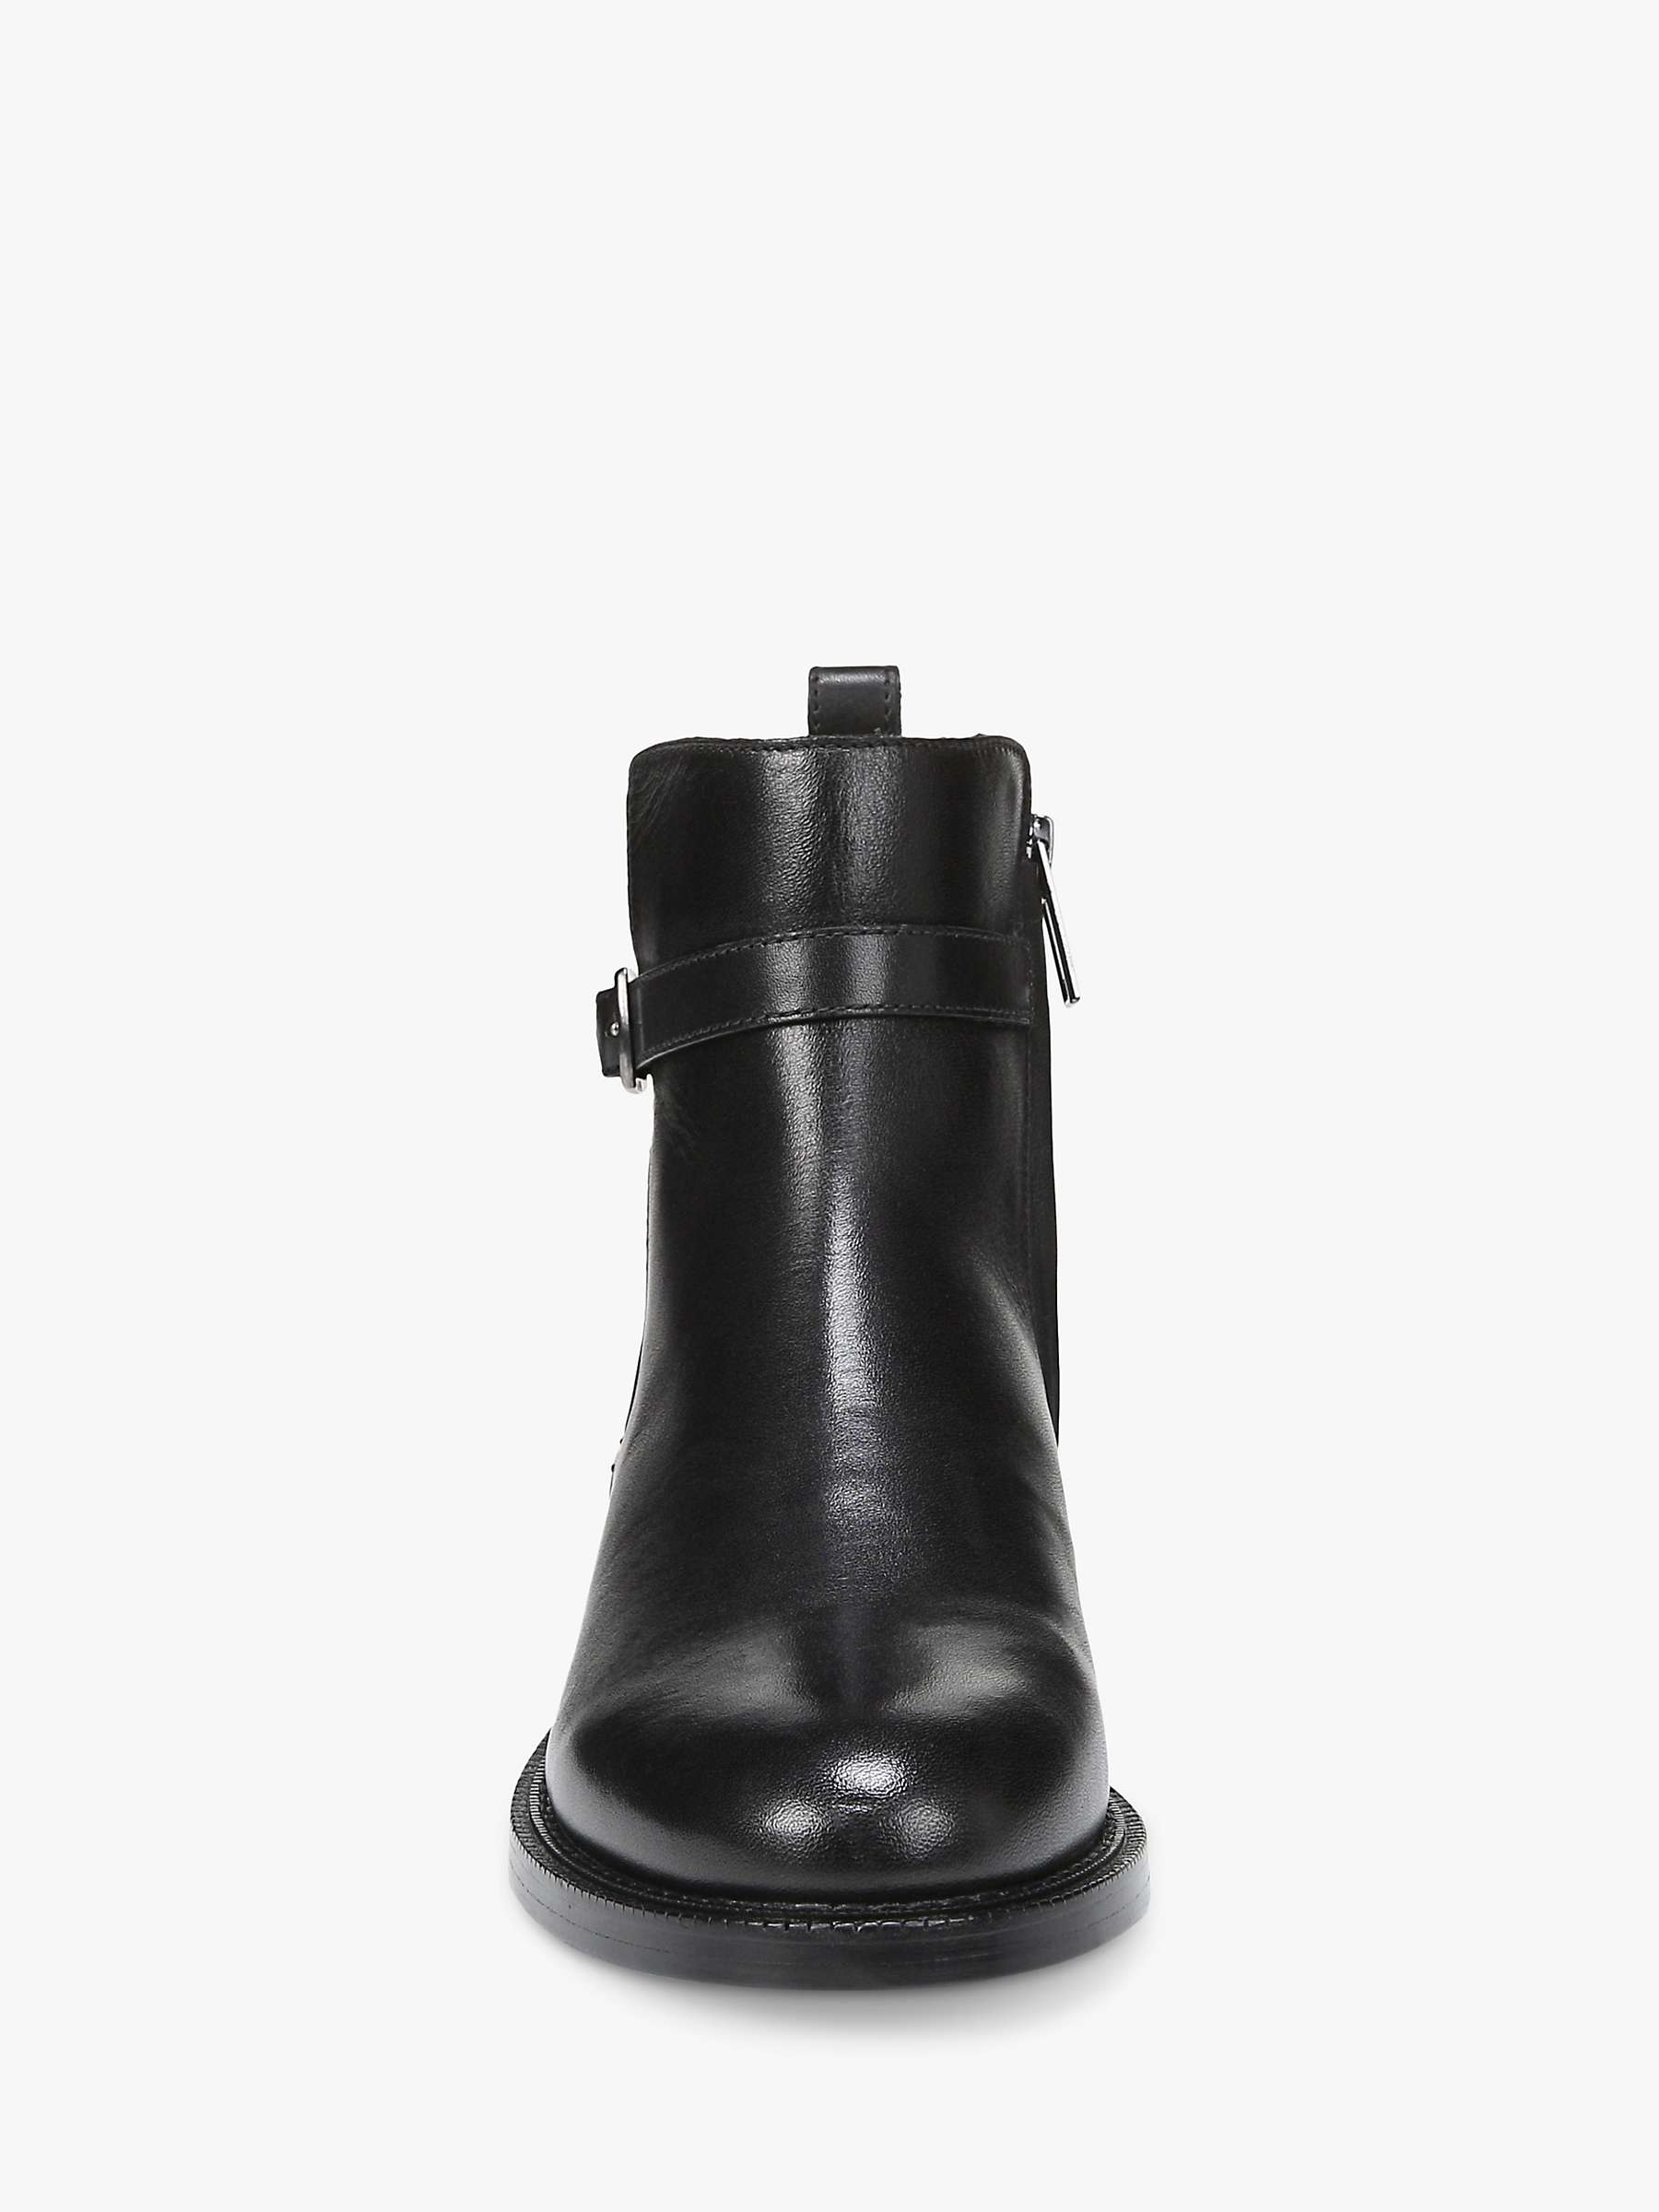 Buy Sam Edelman Nolynn Leather Ankle Boots Online at johnlewis.com